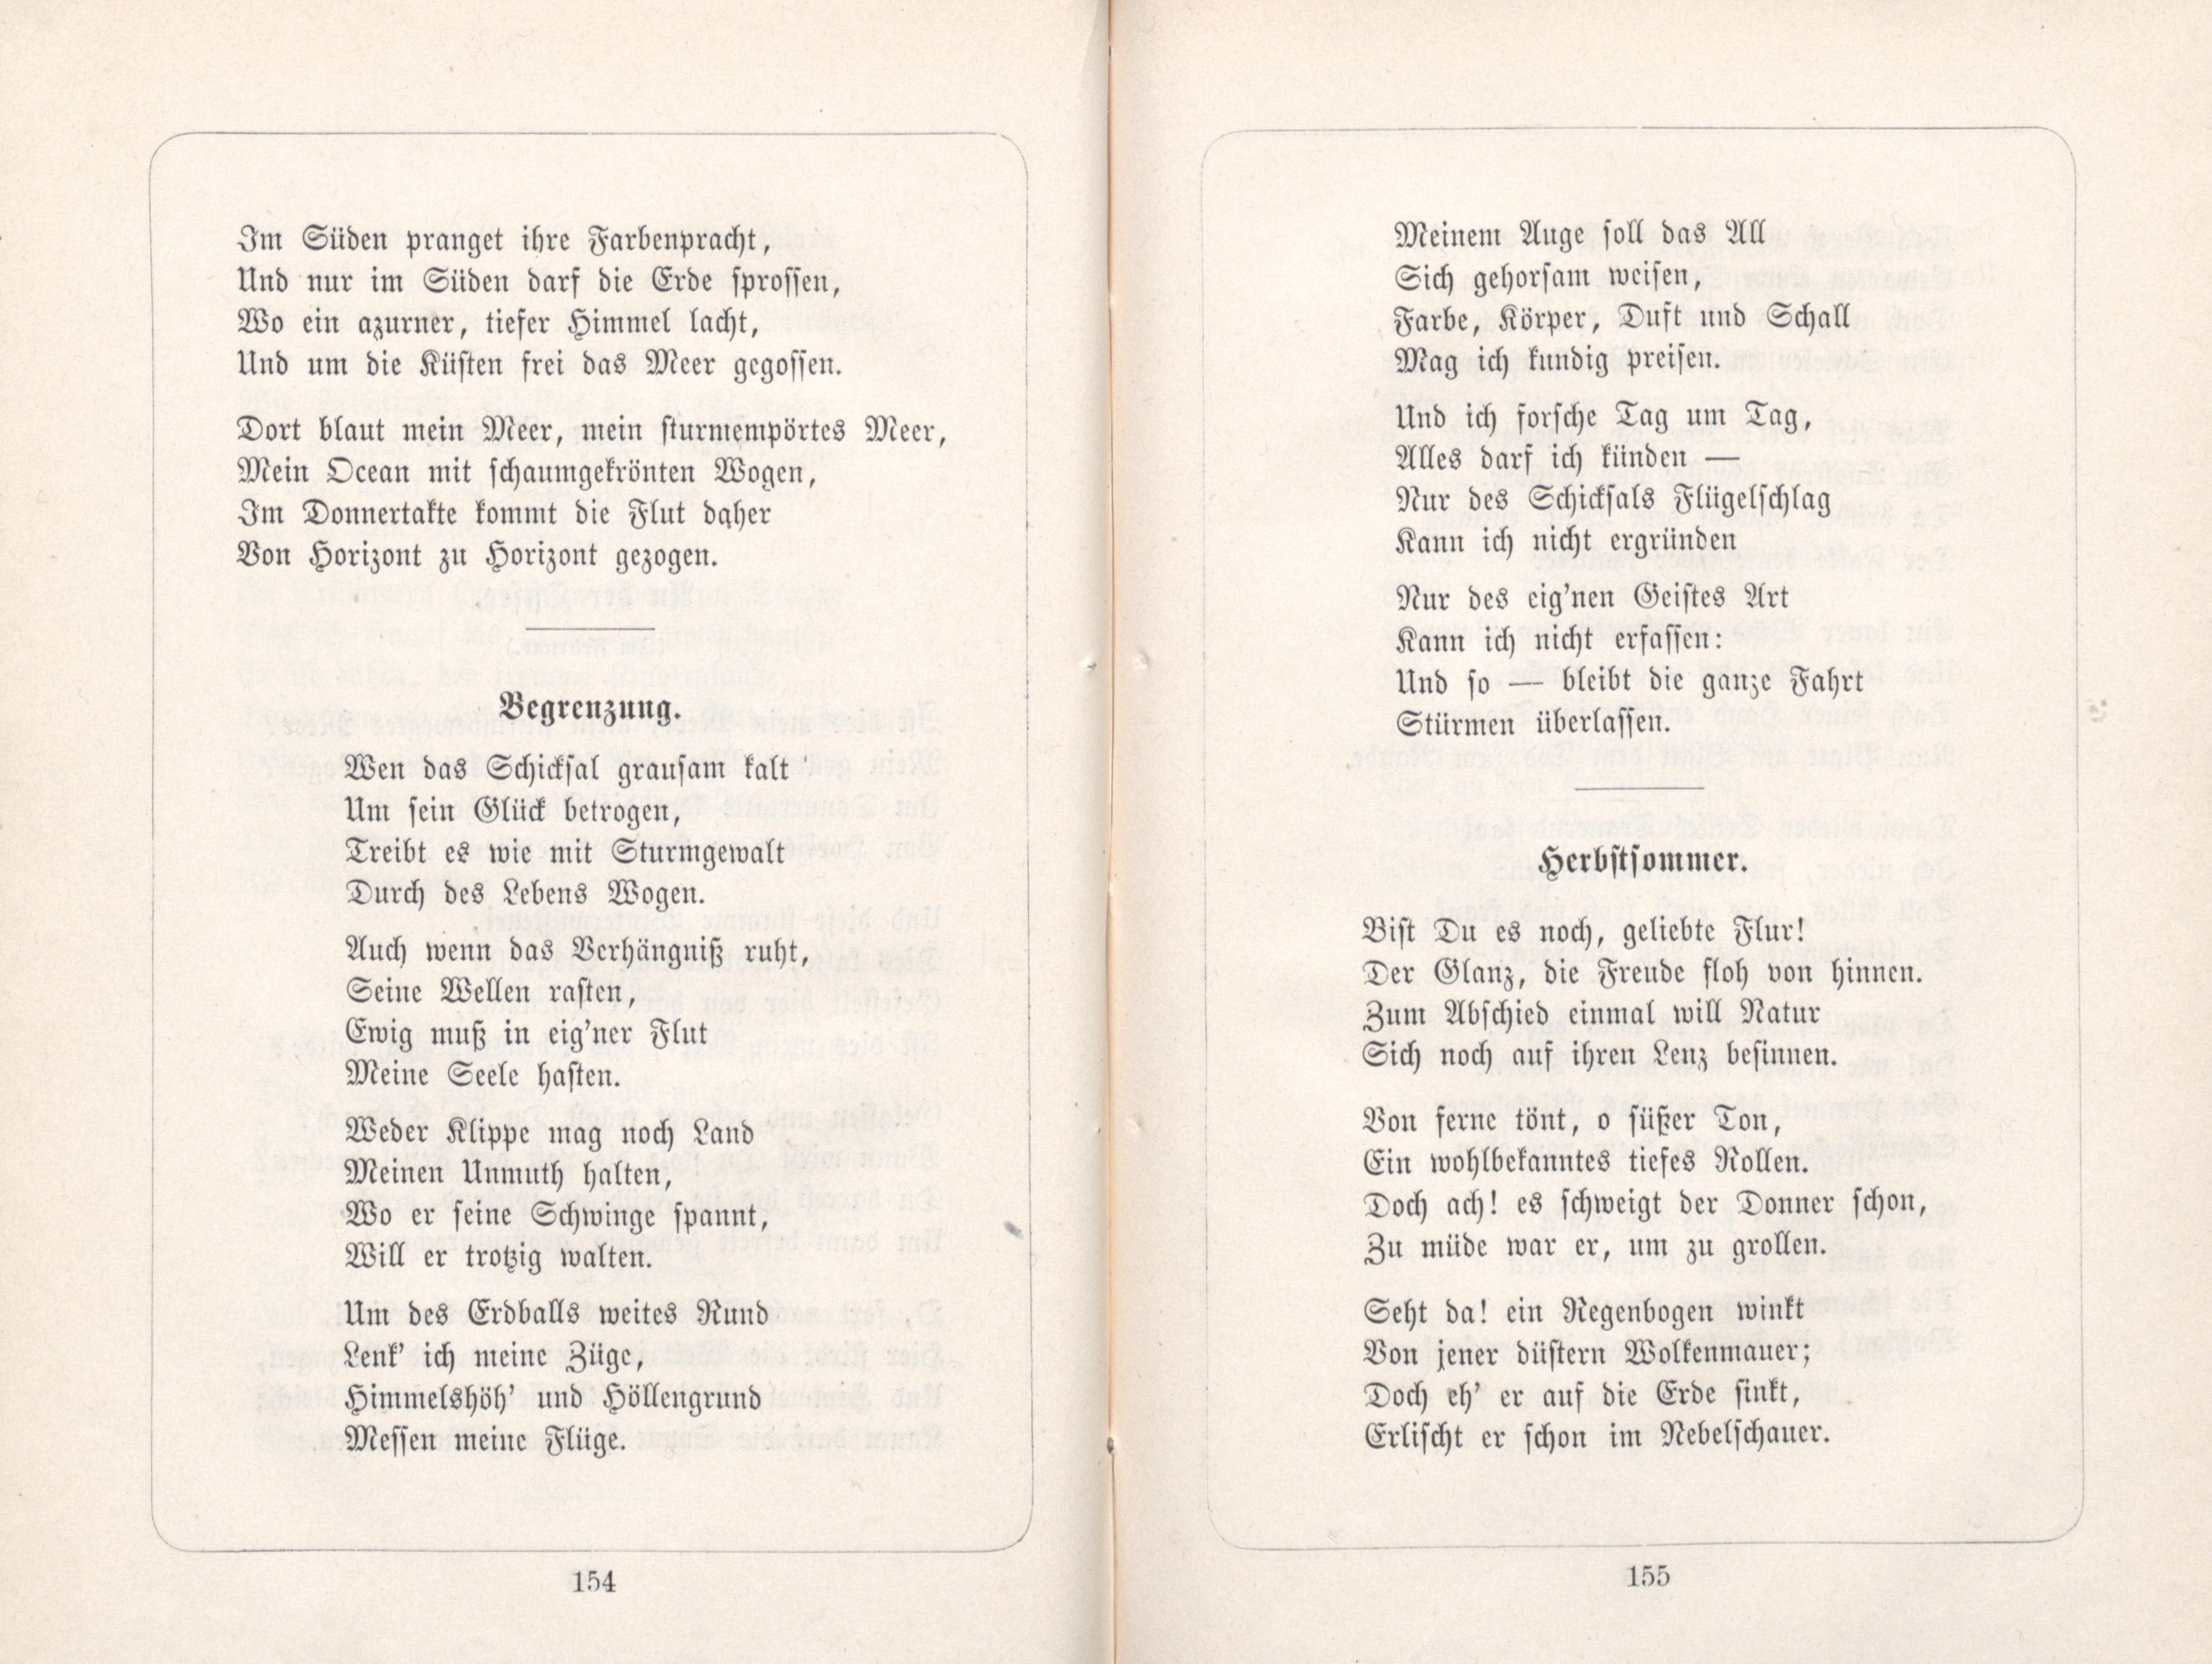 Herbstsommer (1885) | 1. (154-155) Main body of text